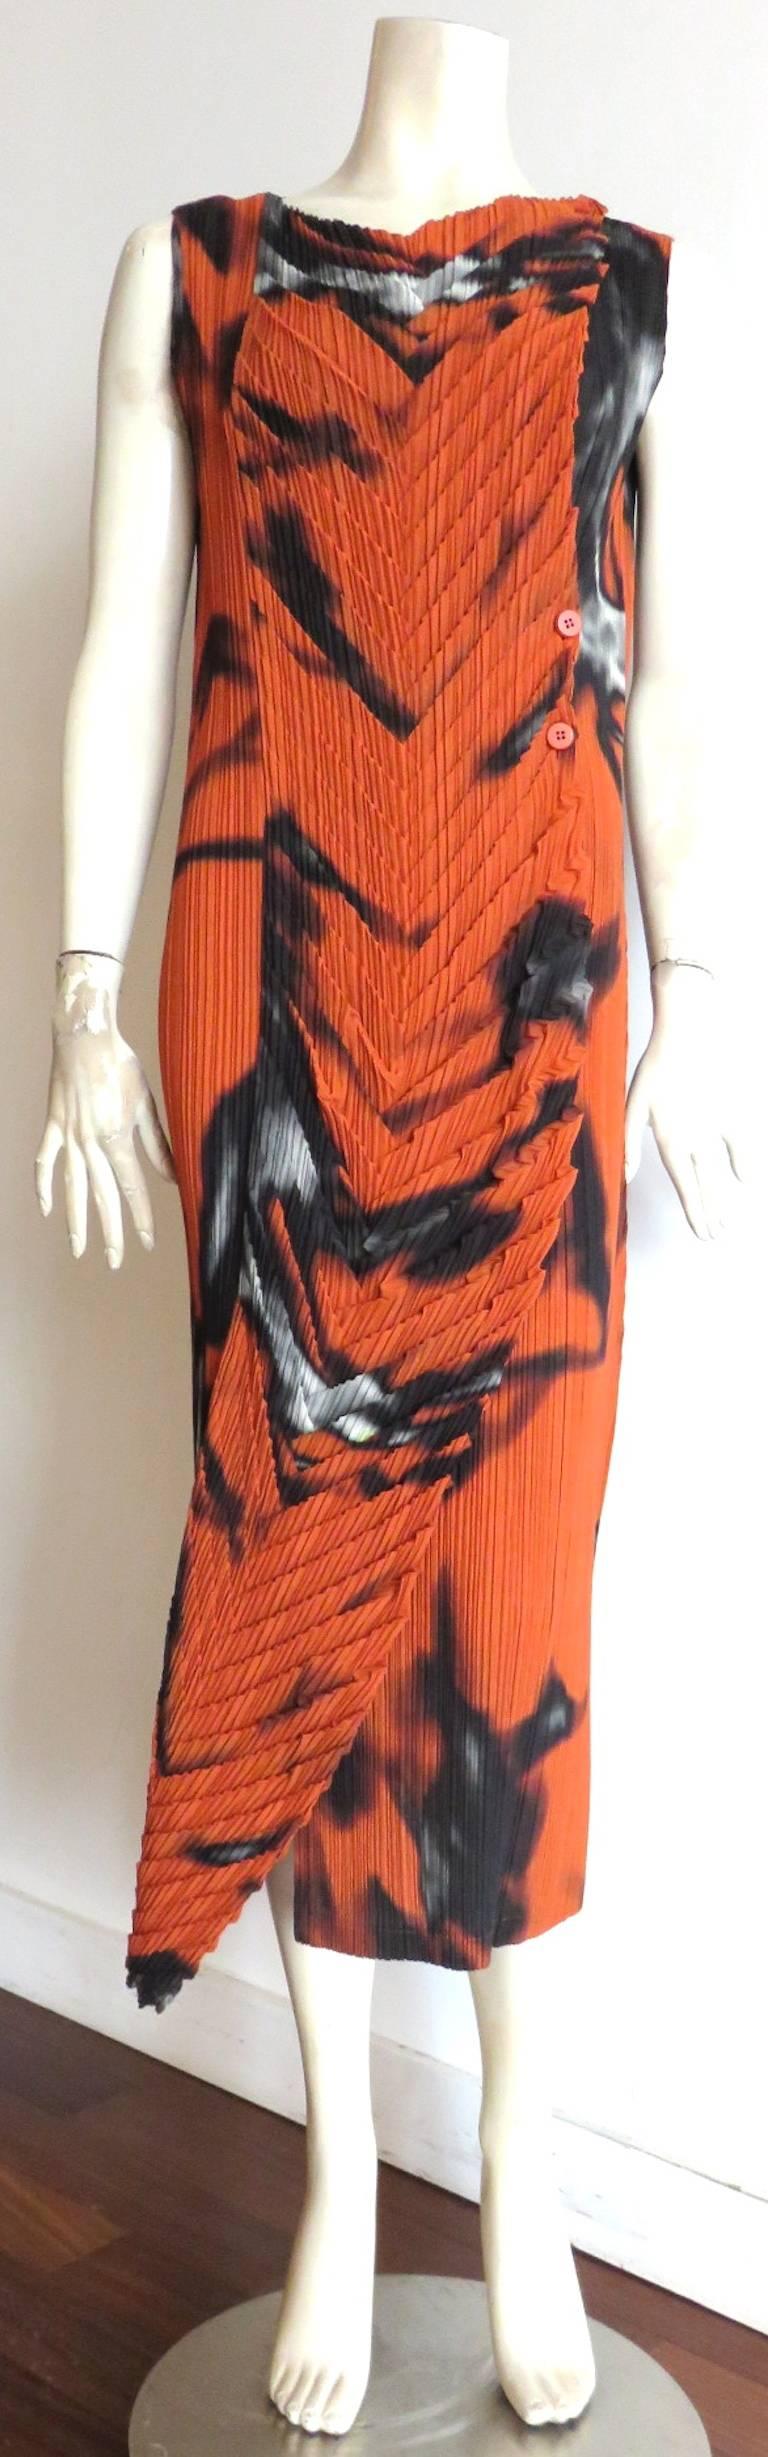 Worn once, 'like new' condition, ISSEY MIYAKE FETE pleated, flame print dress.

Gorgeous, mitered 'V' shape origami construction at the front with button opening at the wearer's left.

Side opening curves towards the front at the bottom